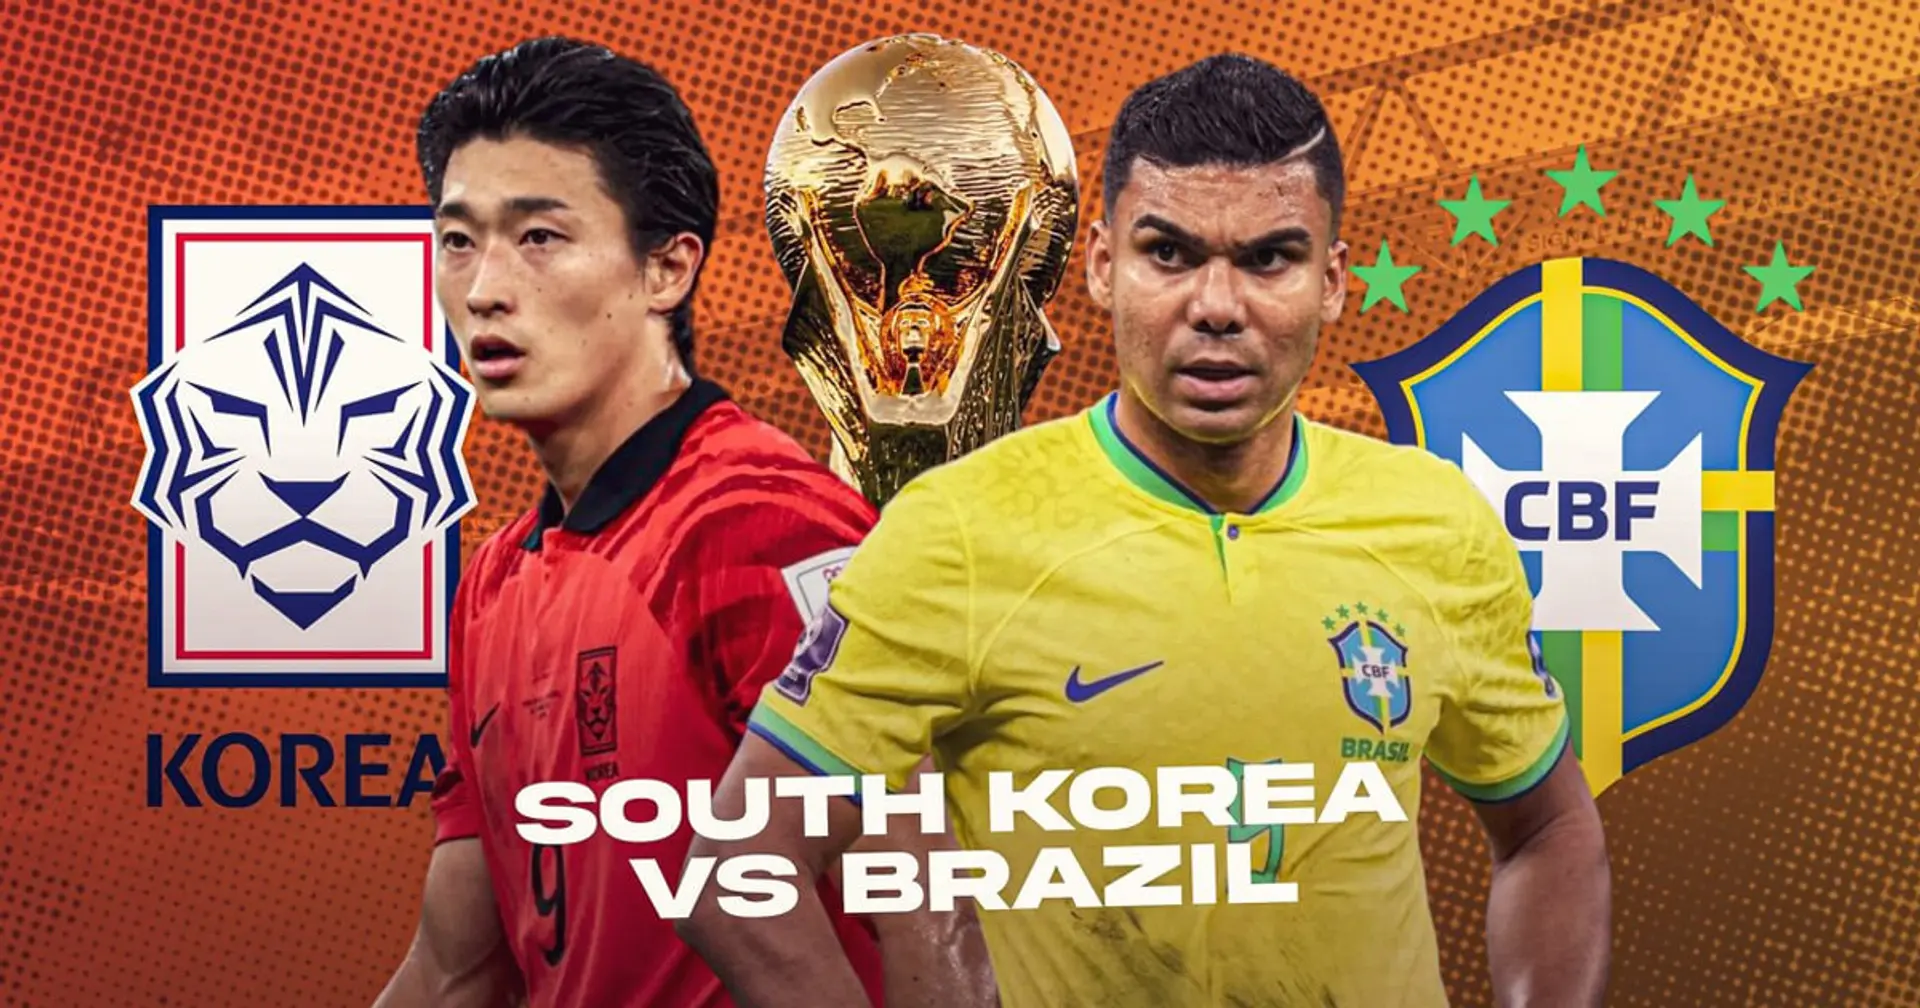 Brazil vs South Korea: Official team lineups for the World Cup clash revealed